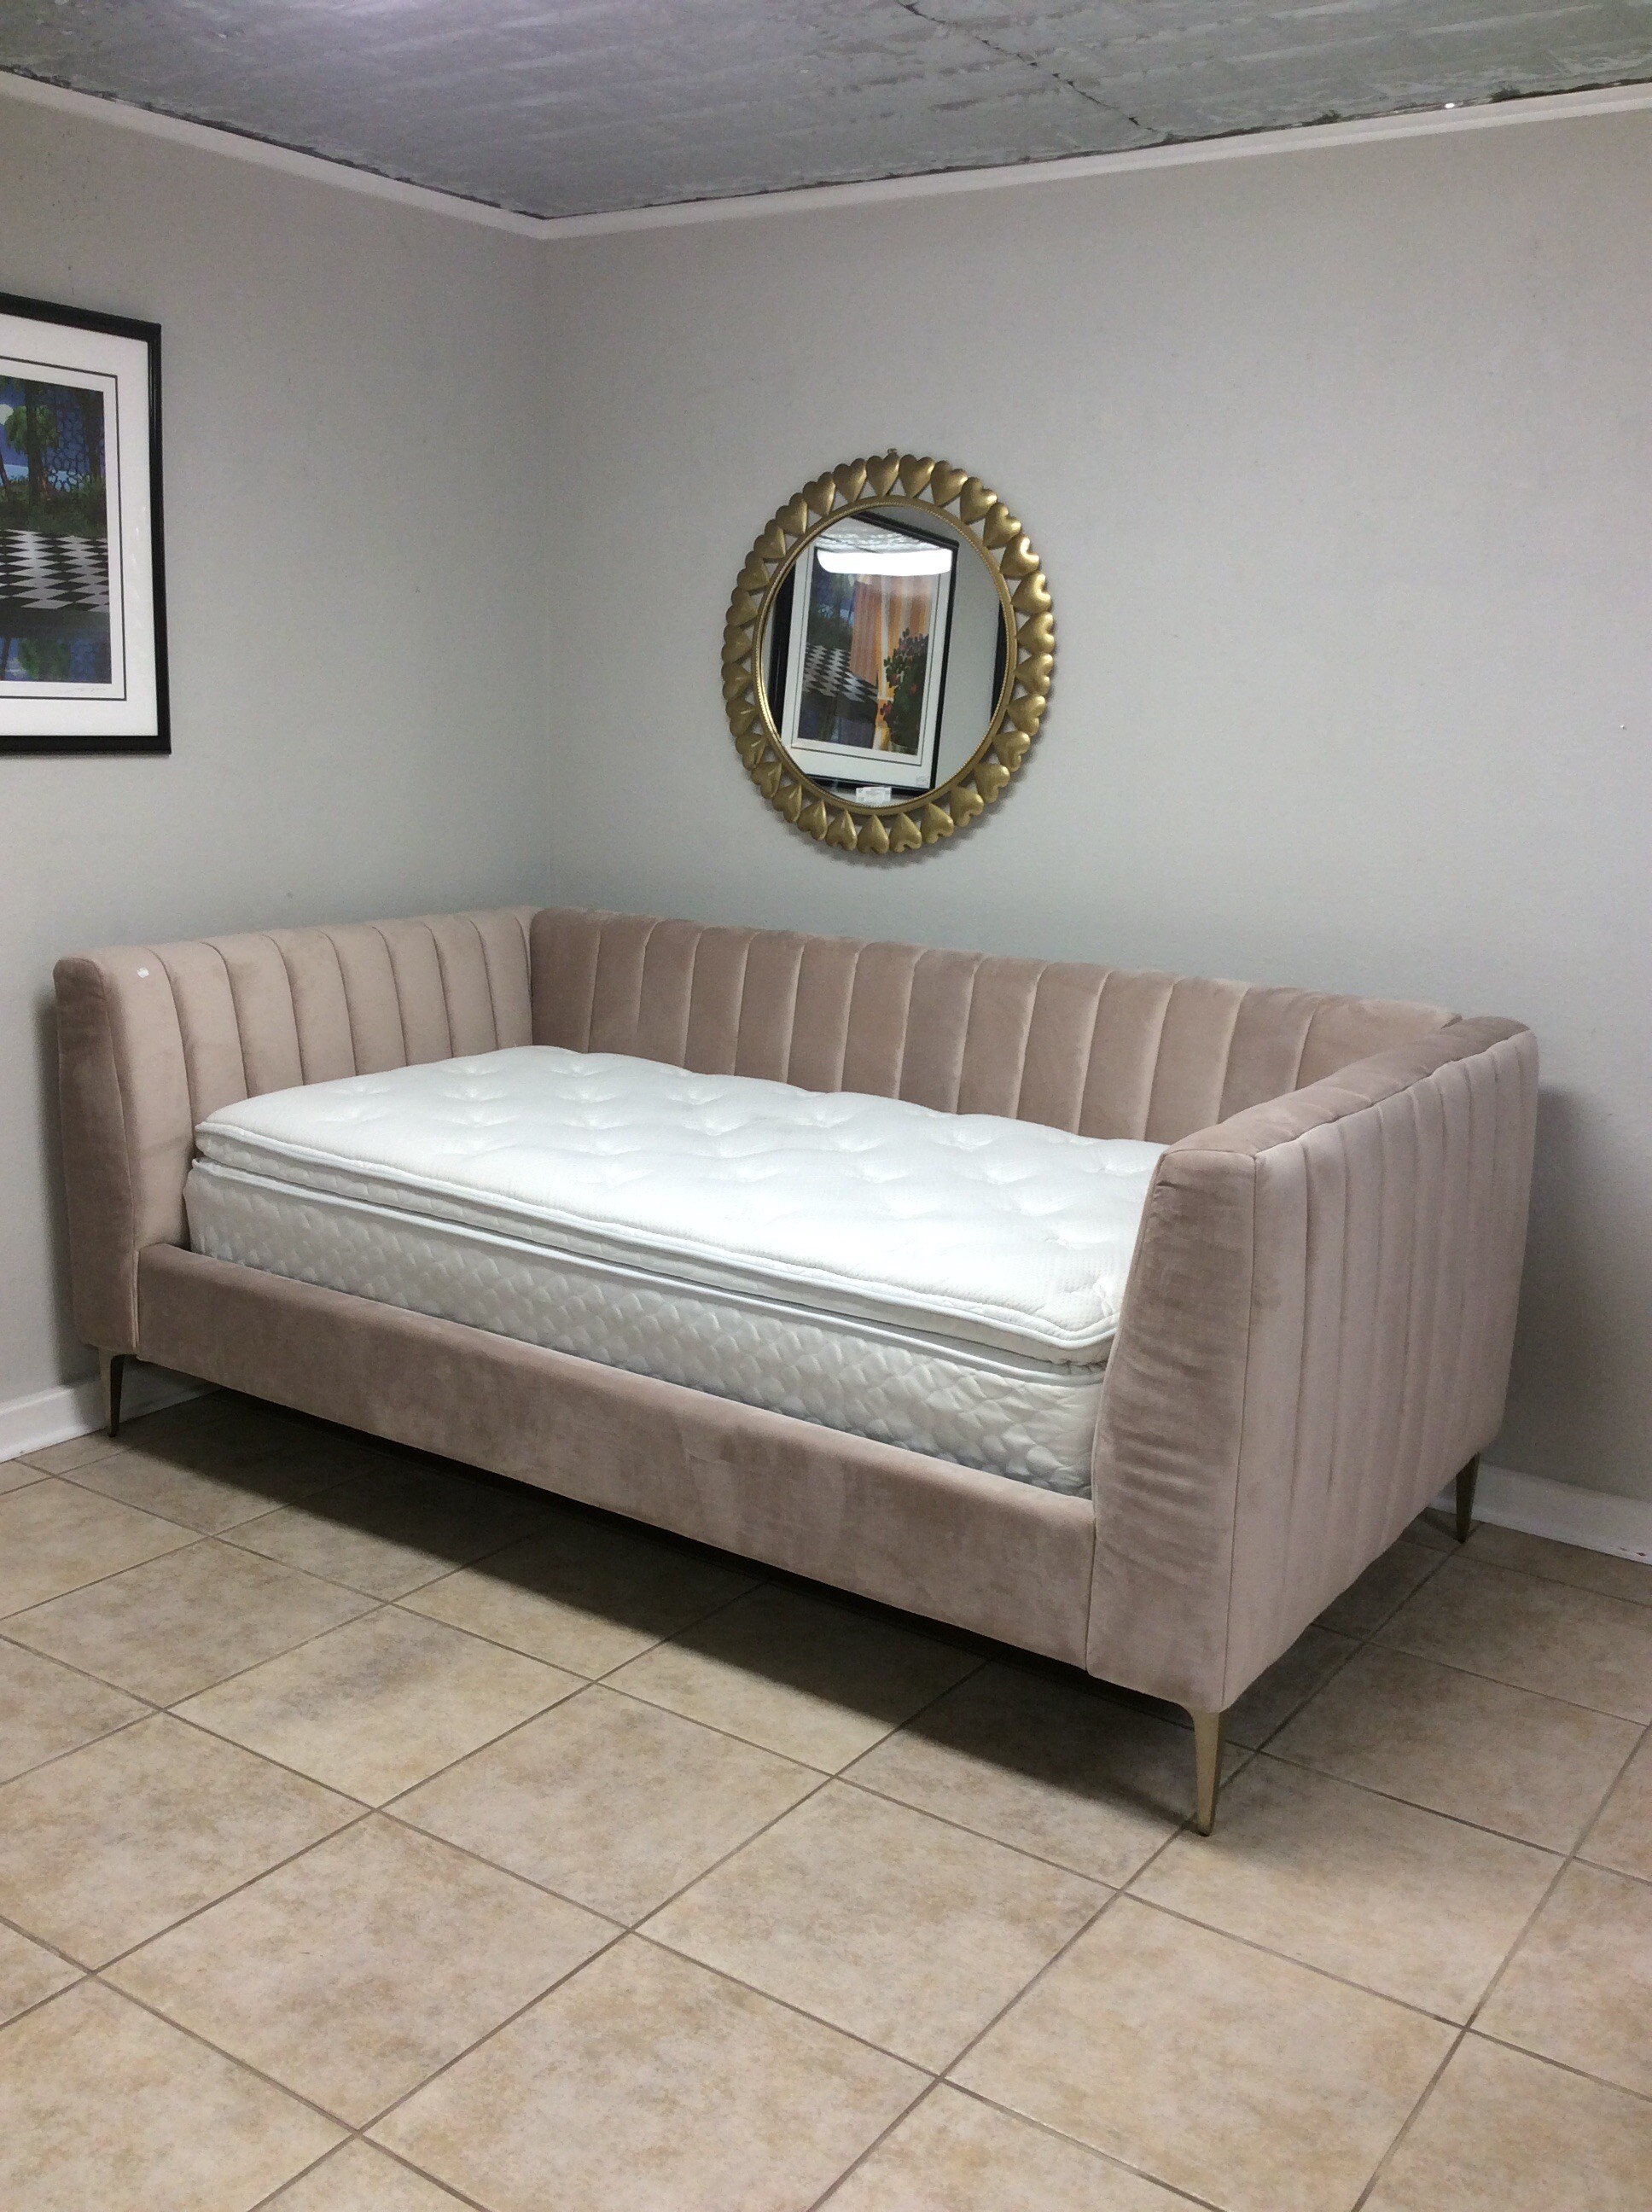 Oh, so feminine and plush! This twin-size daybed from Pottery Barn has been upholstered in blush colored velvet. The mattress is in perfect condition too.